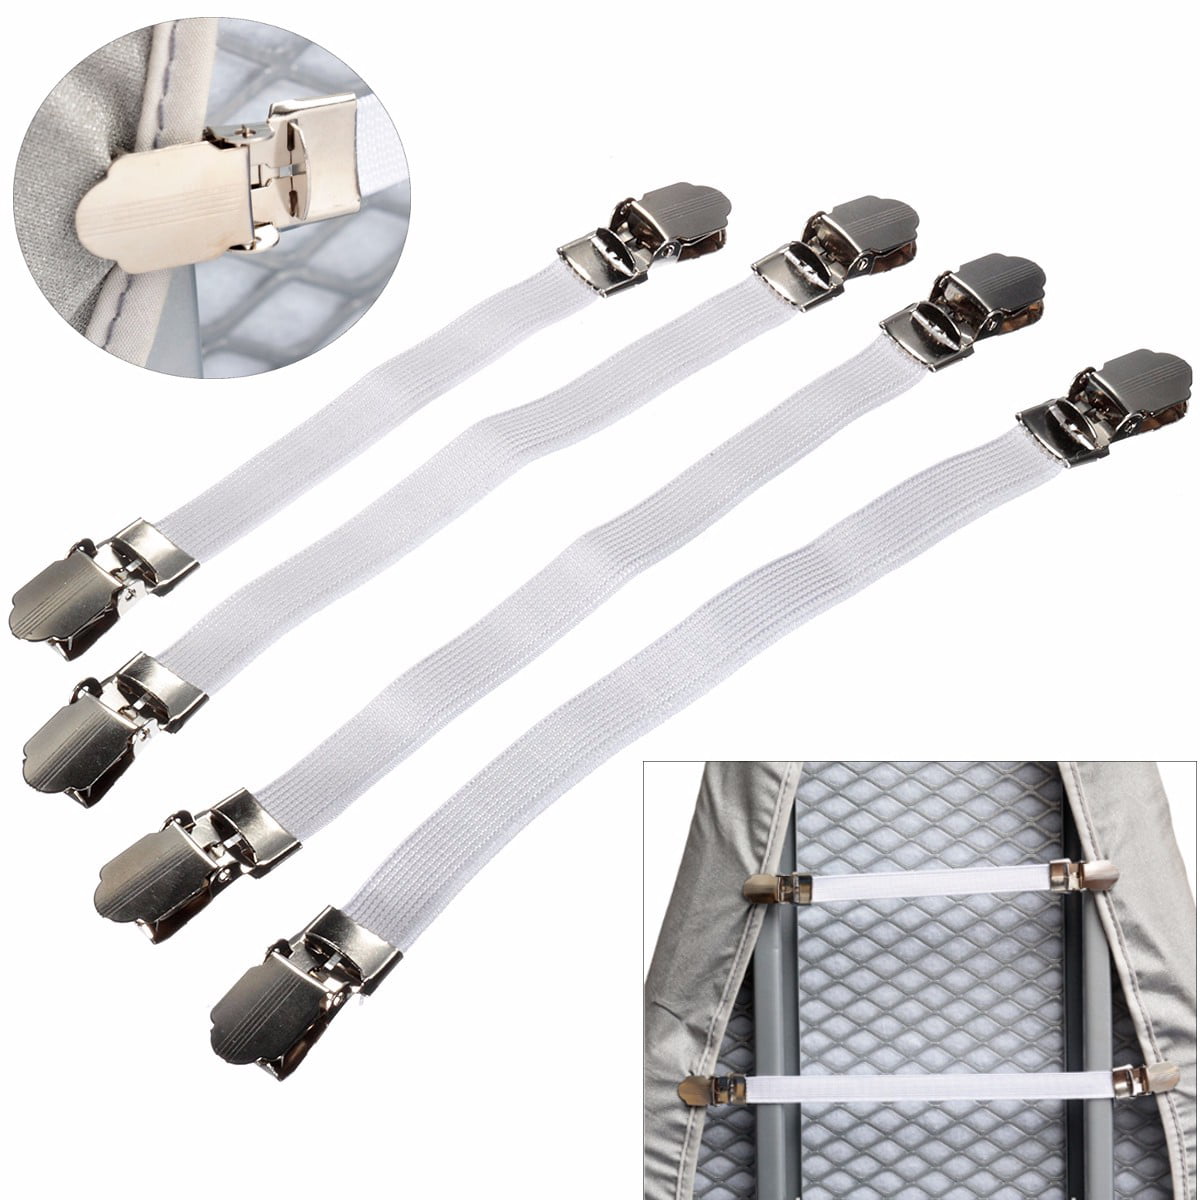 4 x Ironing Board Cover Clip Fasteners Tight Fit Elastic Brace Ties Straps G YF 